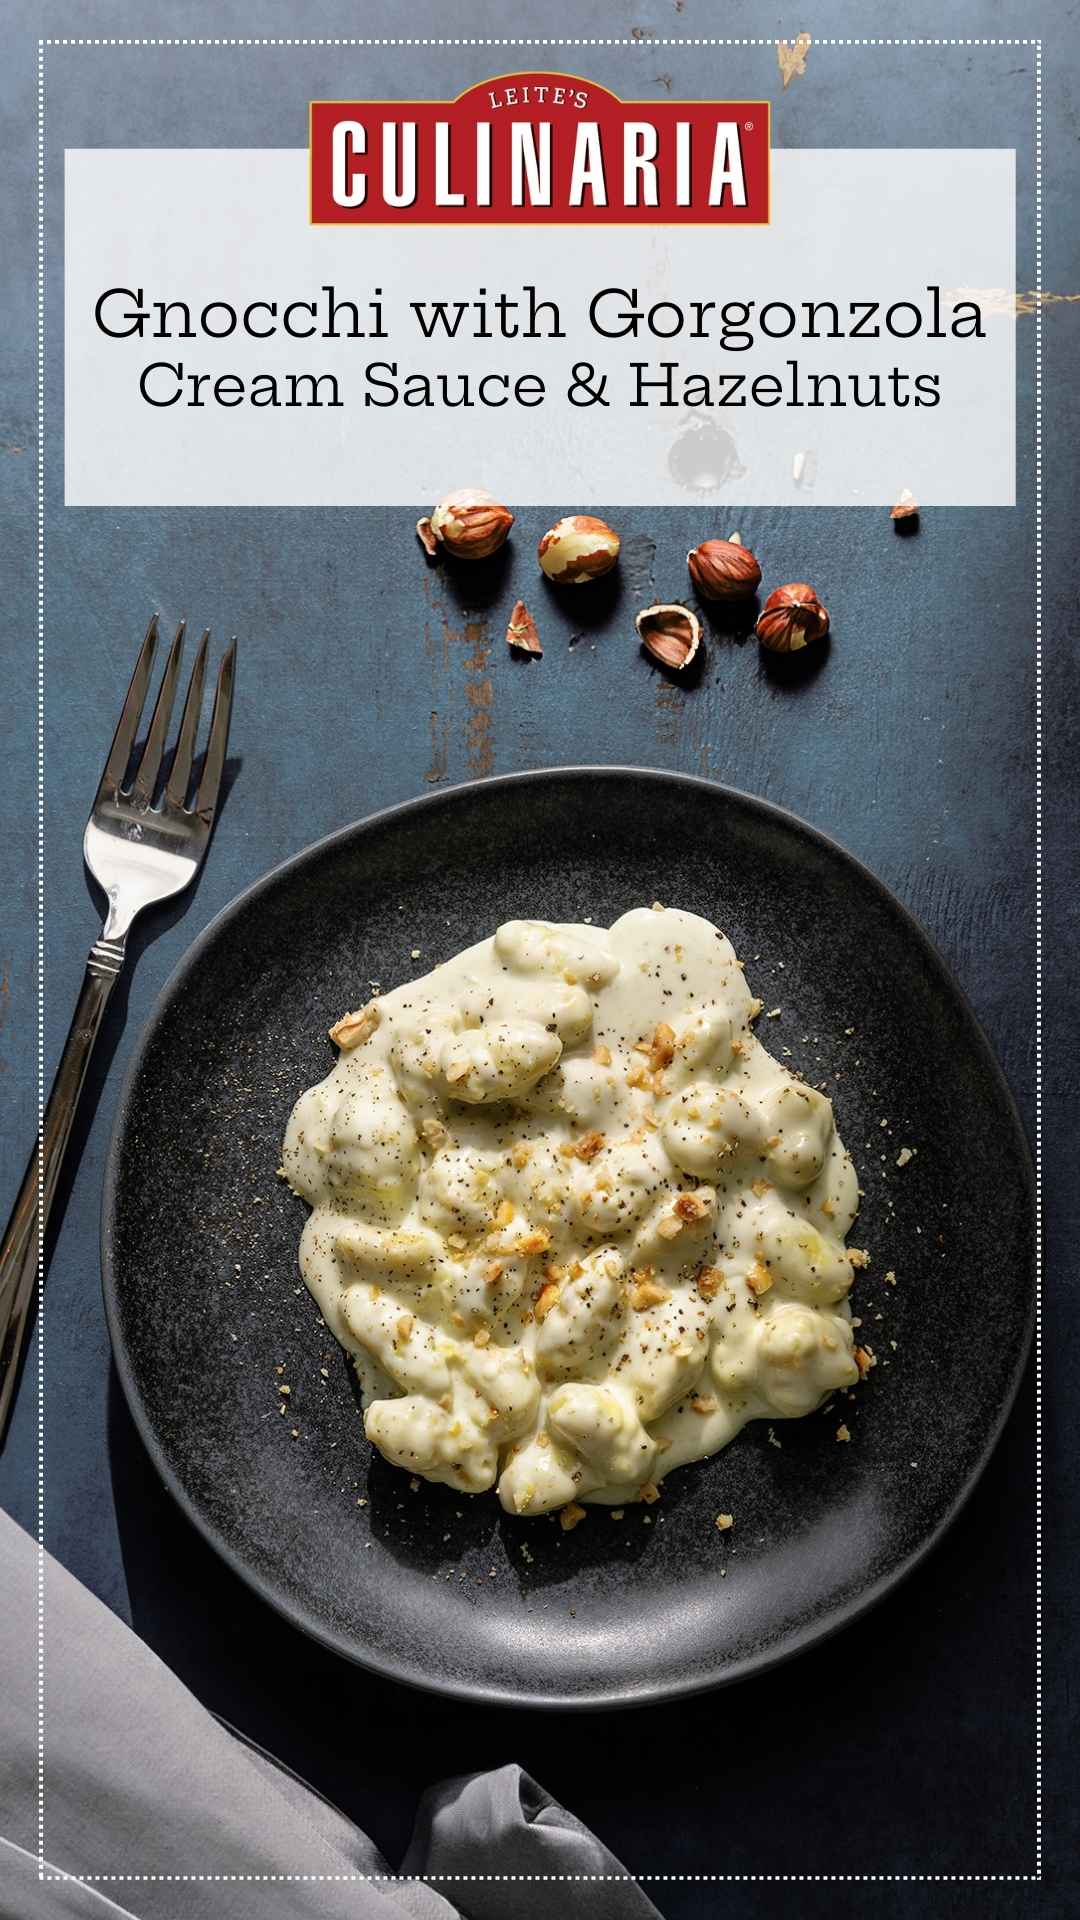 A portion of gnocchi with gorgonzola cream sauce sprinkled with chopped hazelnuts on a black plate.